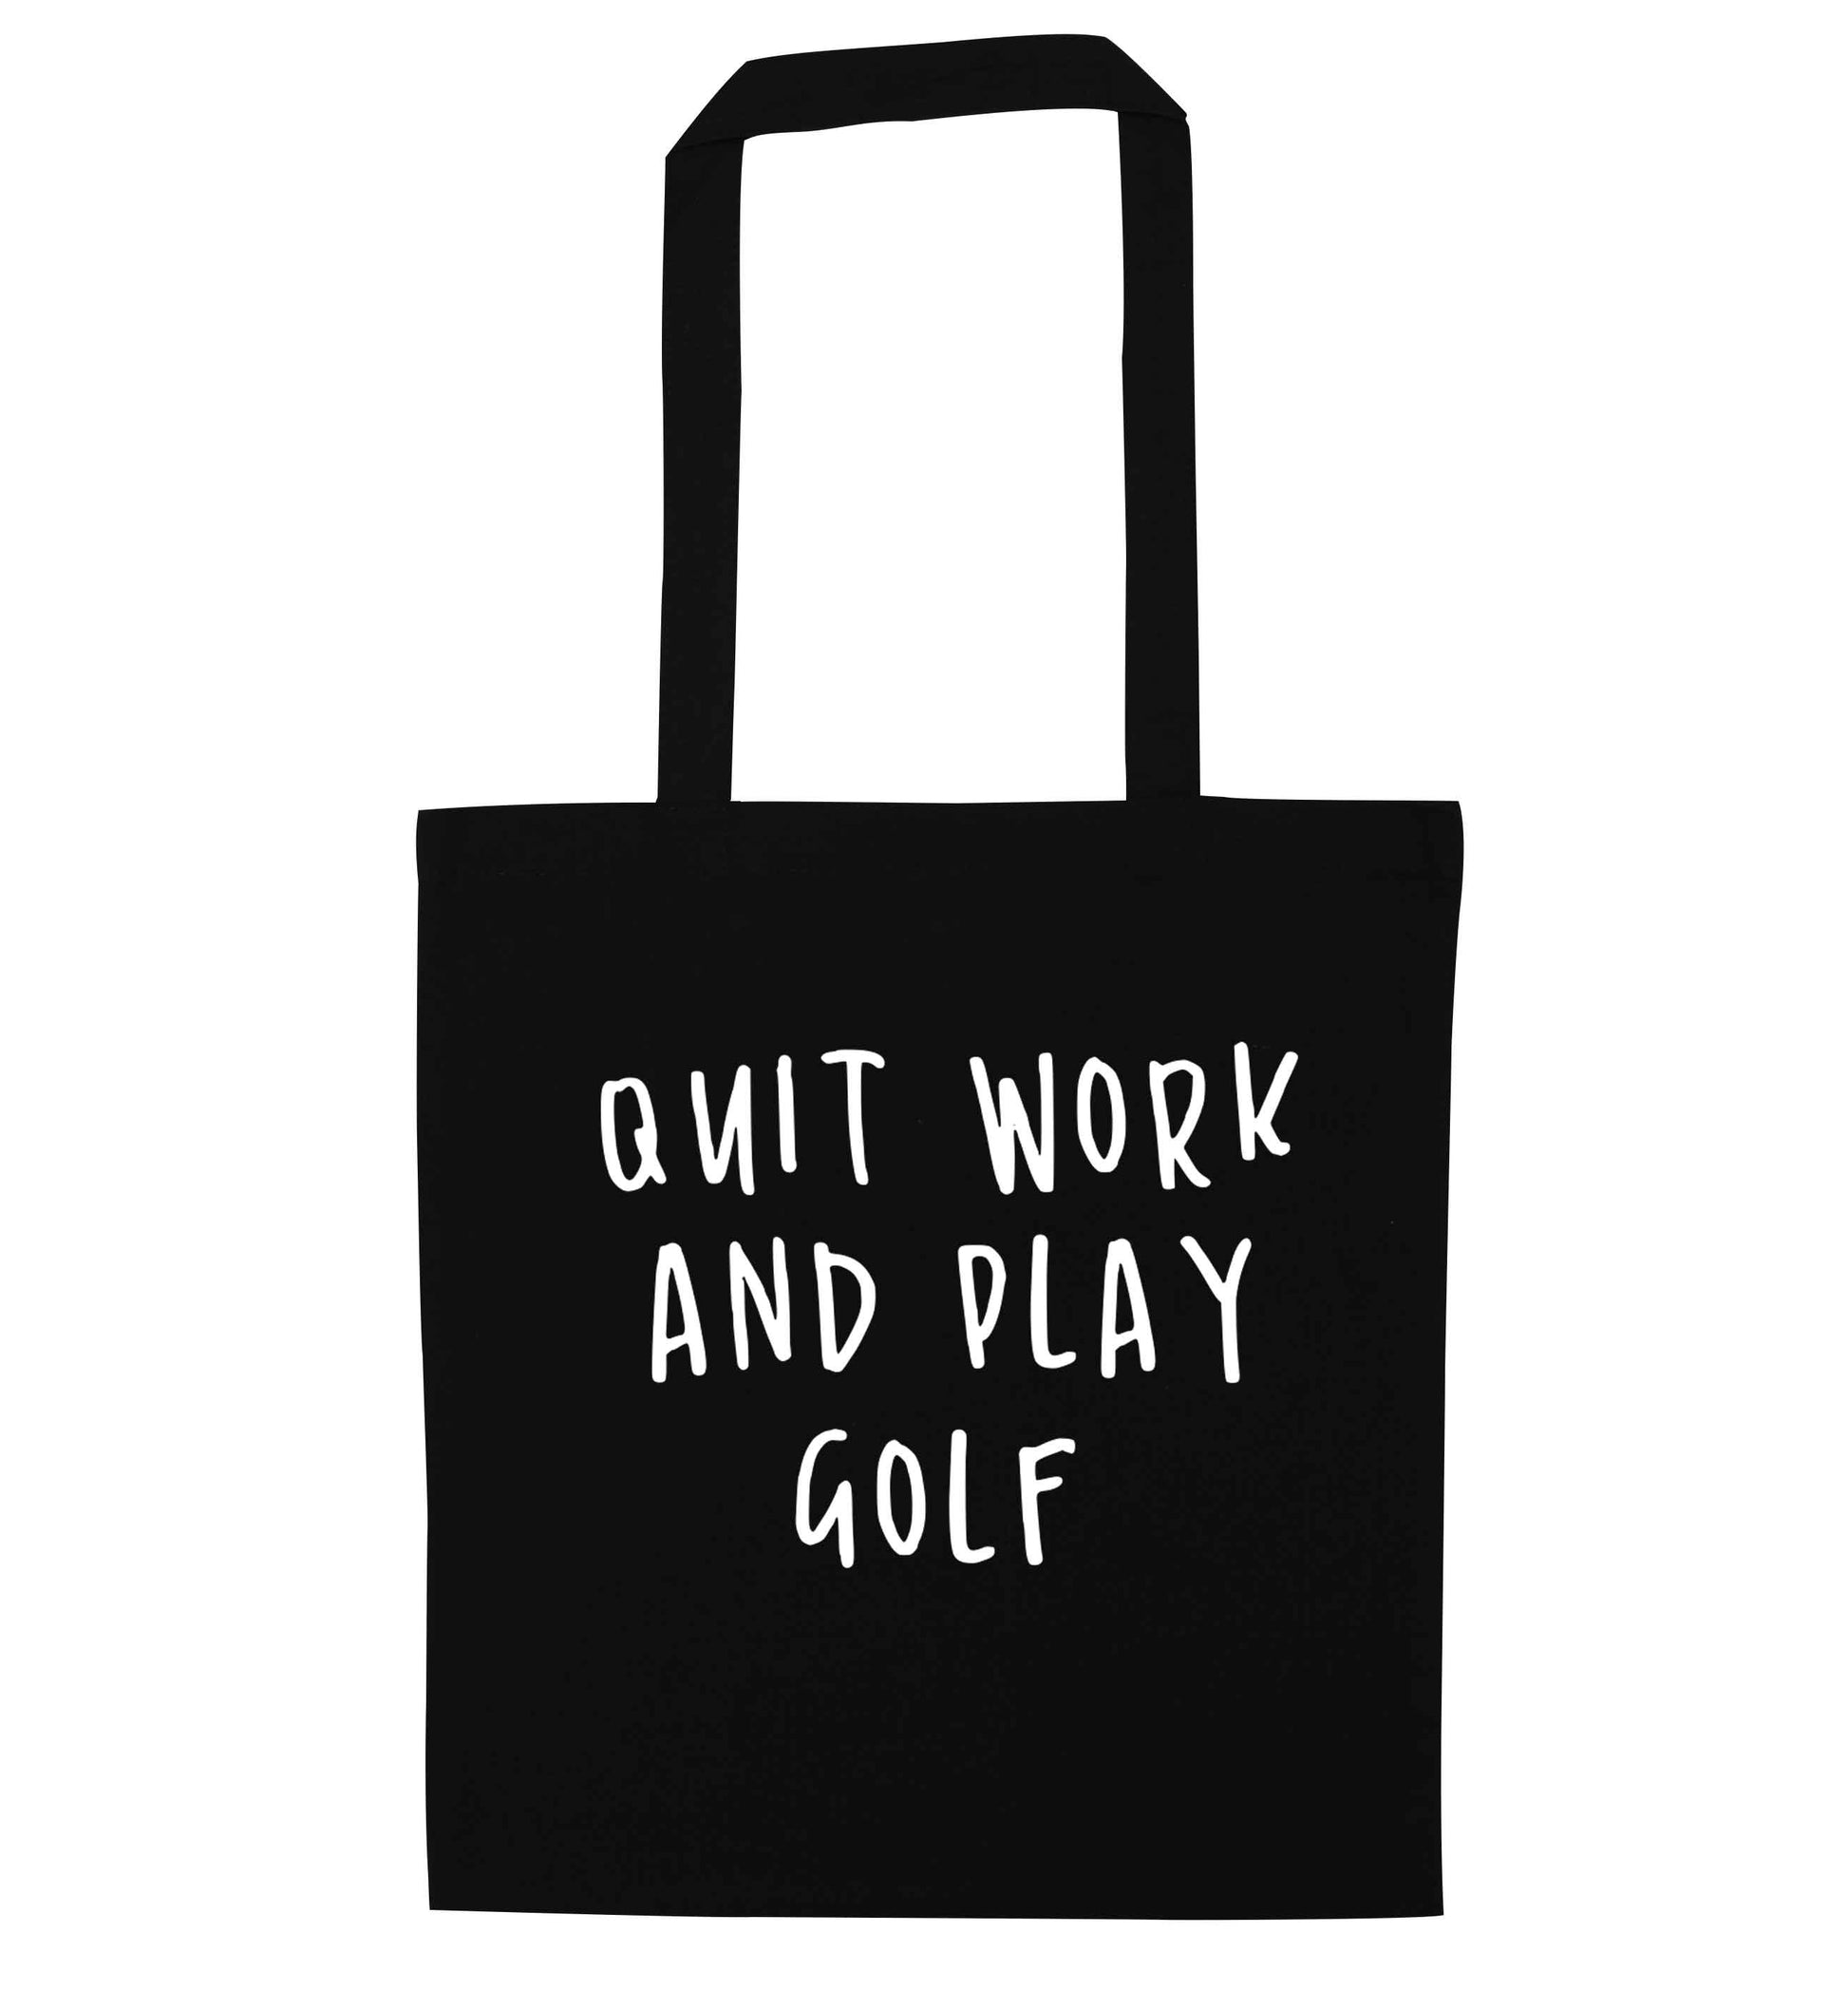 Quit work and play golf black tote bag